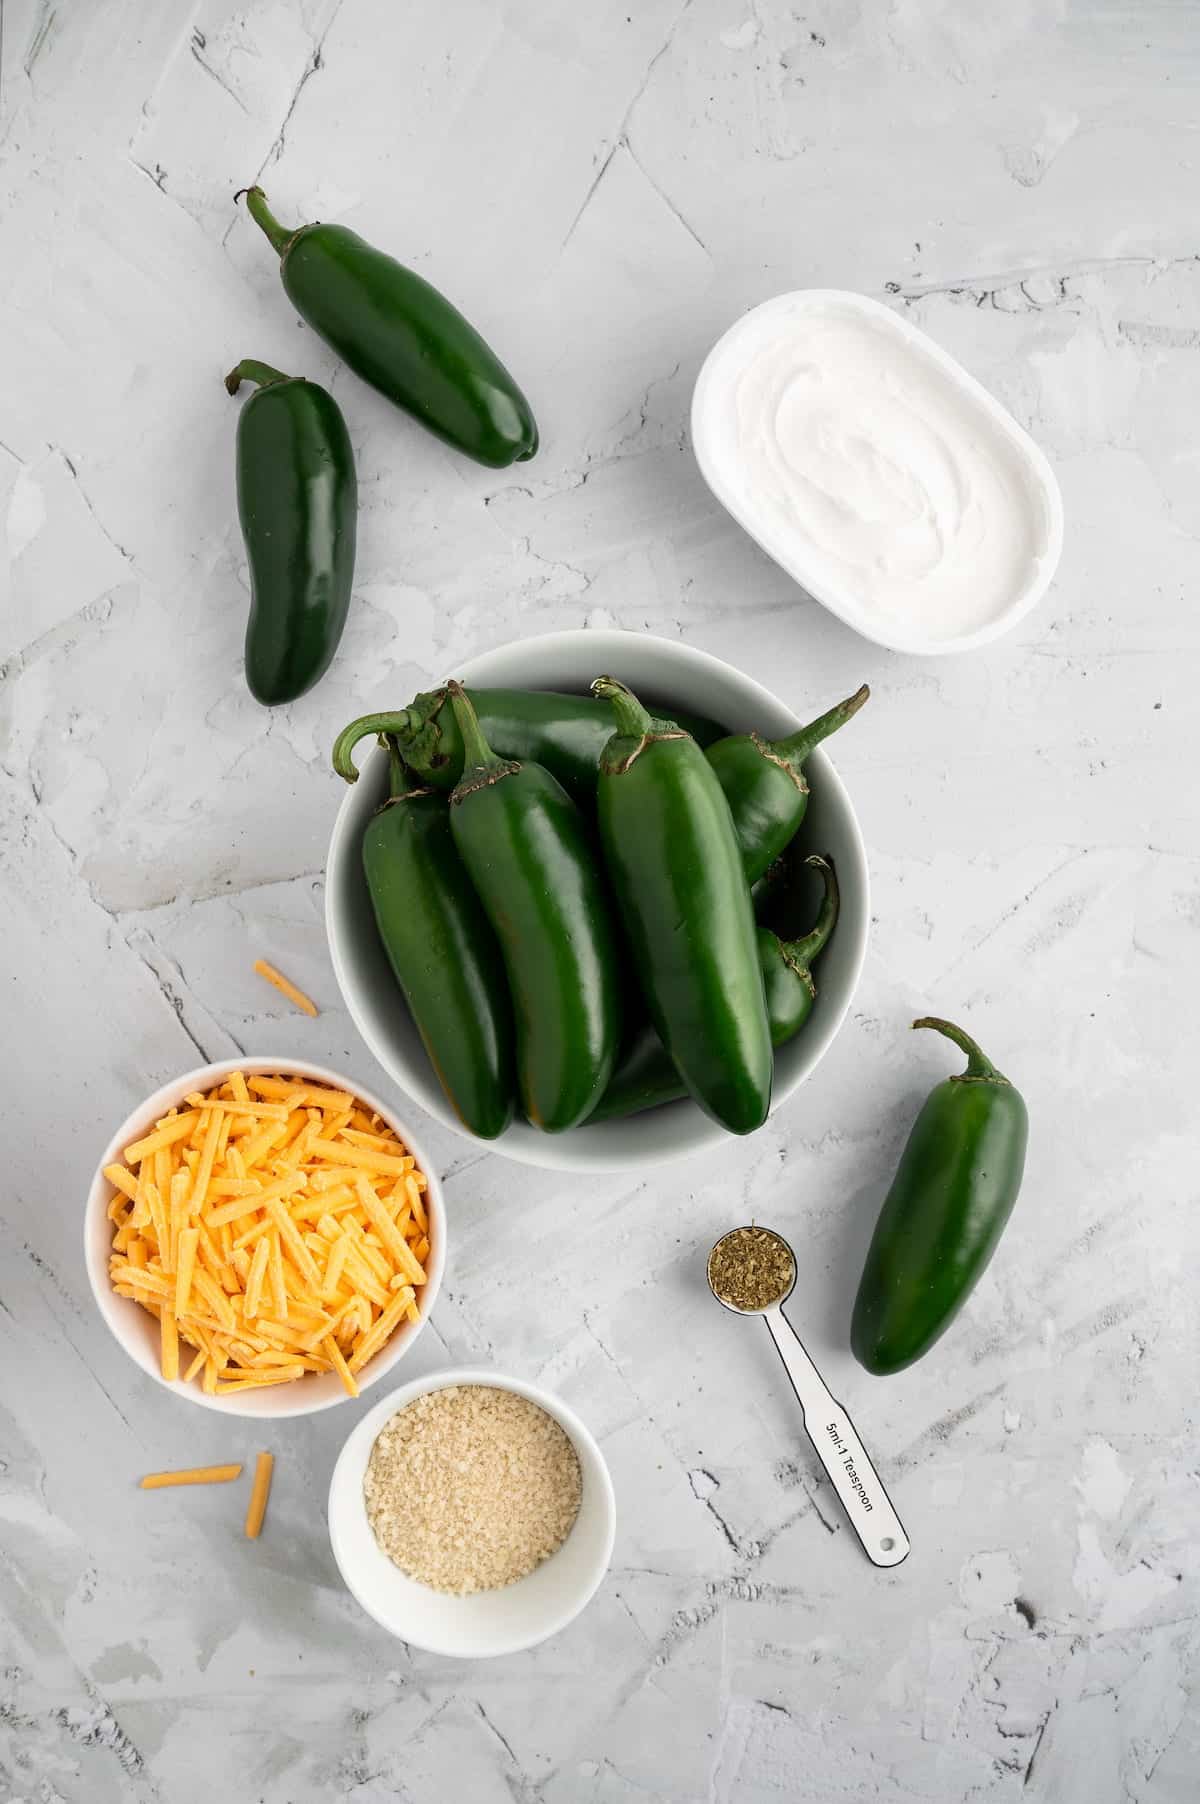 A top-down shot of ingredients for jalapeno poppers against a marble background.